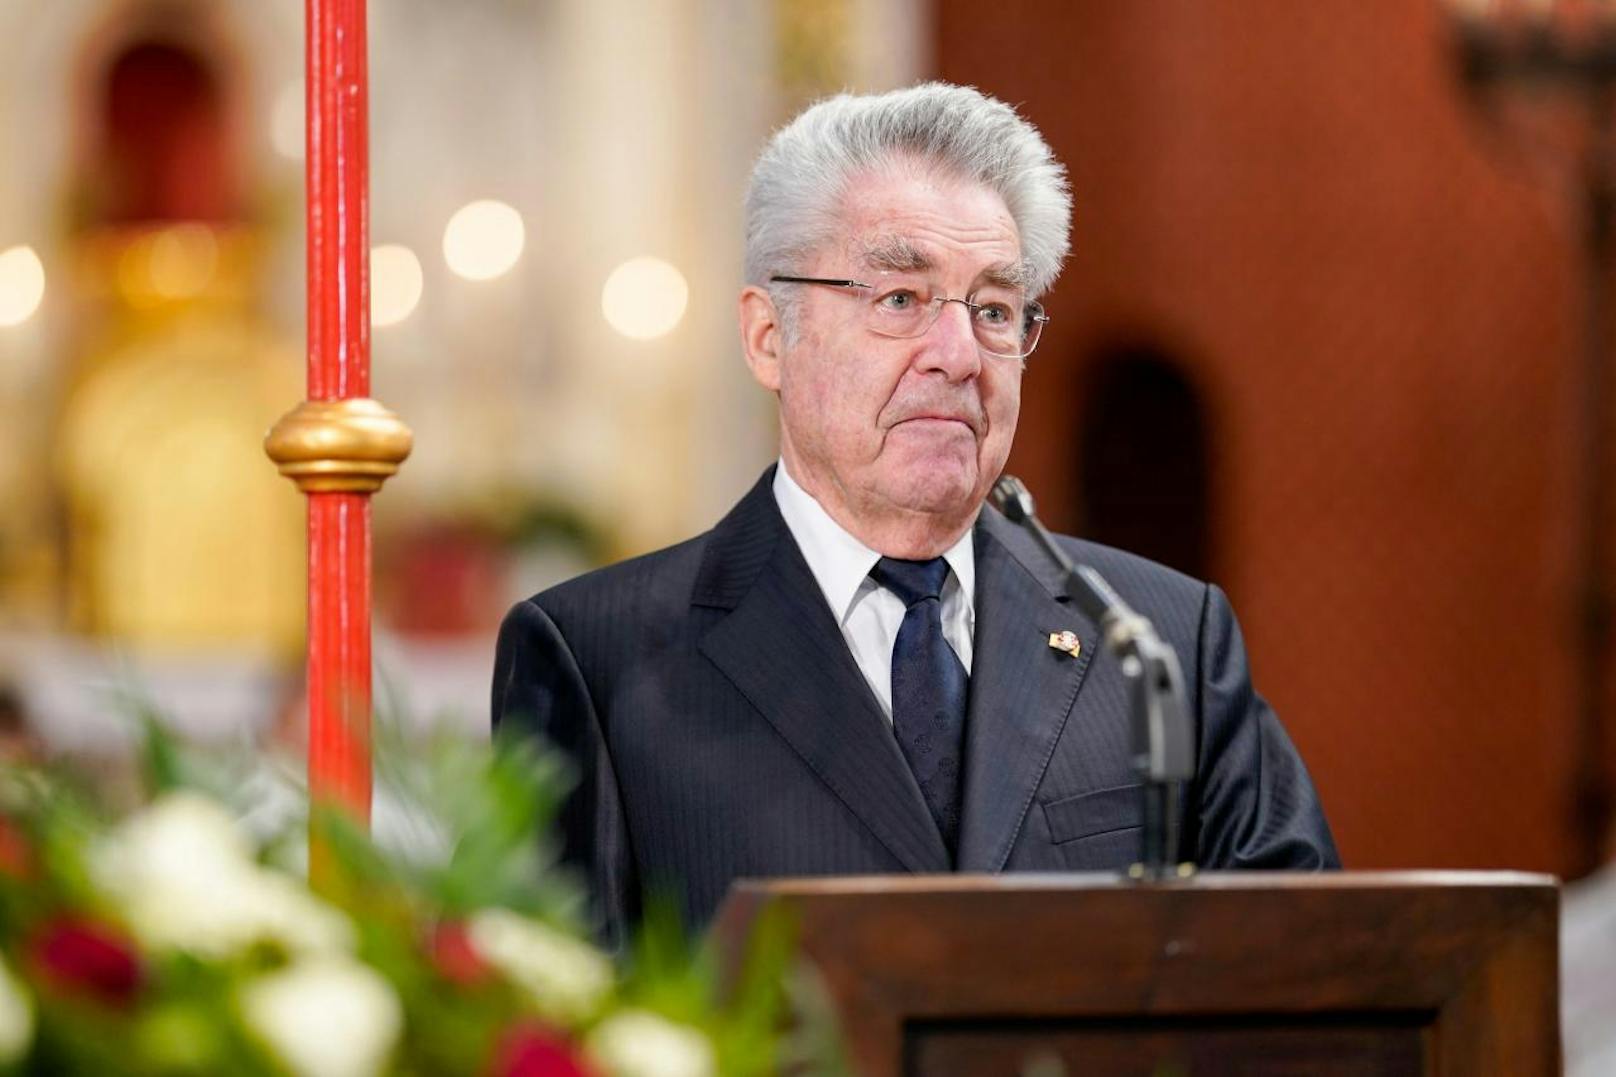 Download von www.picturedesk.com am 06.02.2020 (17:50). 
VIENNA, AUSTRIA - FEBRUARY 6: Former Federal President Heinz Fischer during the Funeral - Farewell to Alfred Koerner at St. Anna Church on February 6, 2020 in Vienna, Austria.200206_SEPA_01_026 - 20200206_PD6008